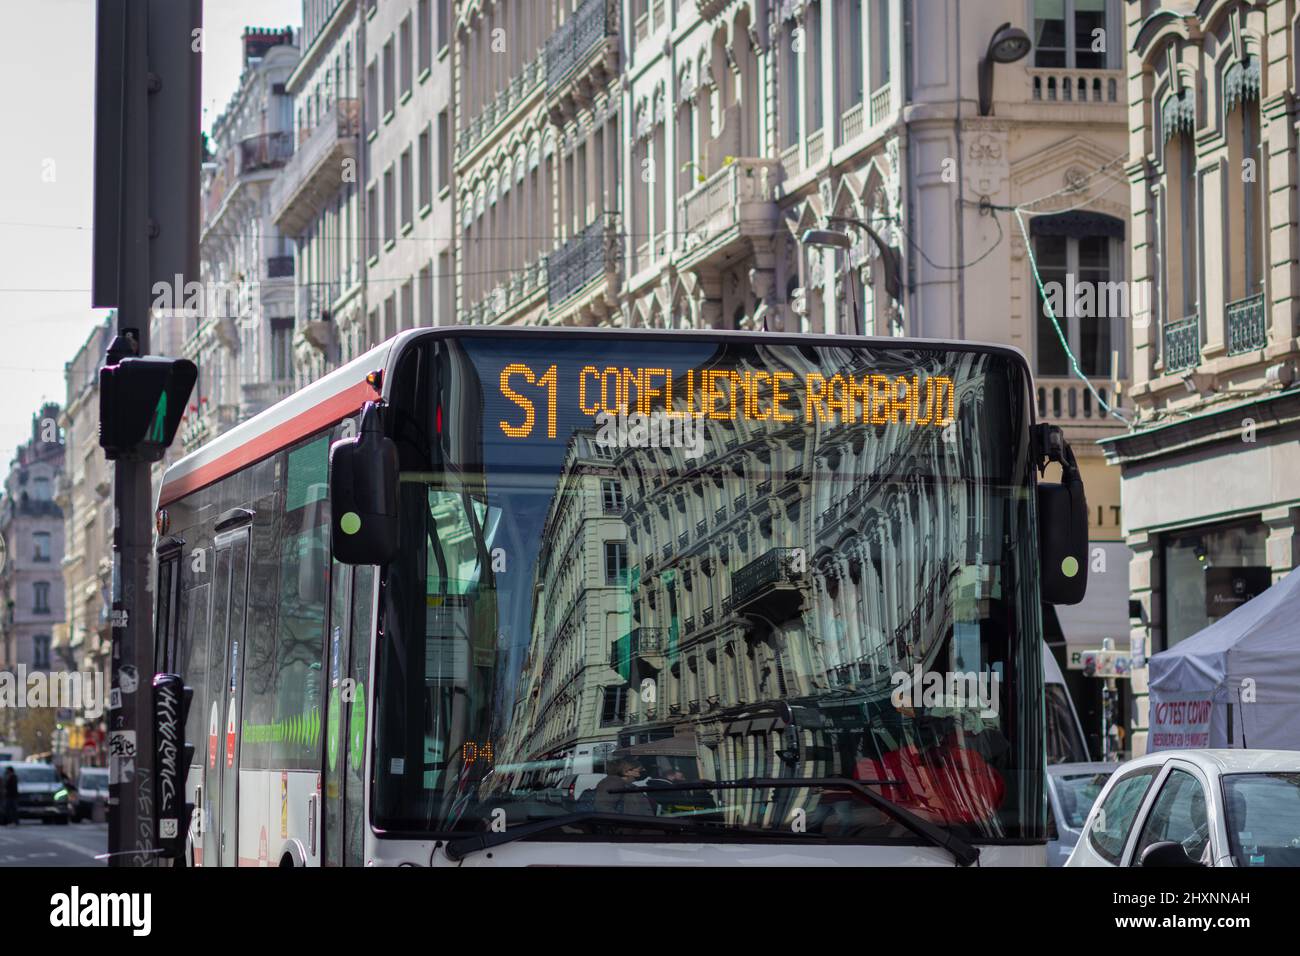 lyon- france. 18-02-2022. A public bus travels in the old city of Lyon - France - against the backdrop of the magnificent buildings. Stock Photo